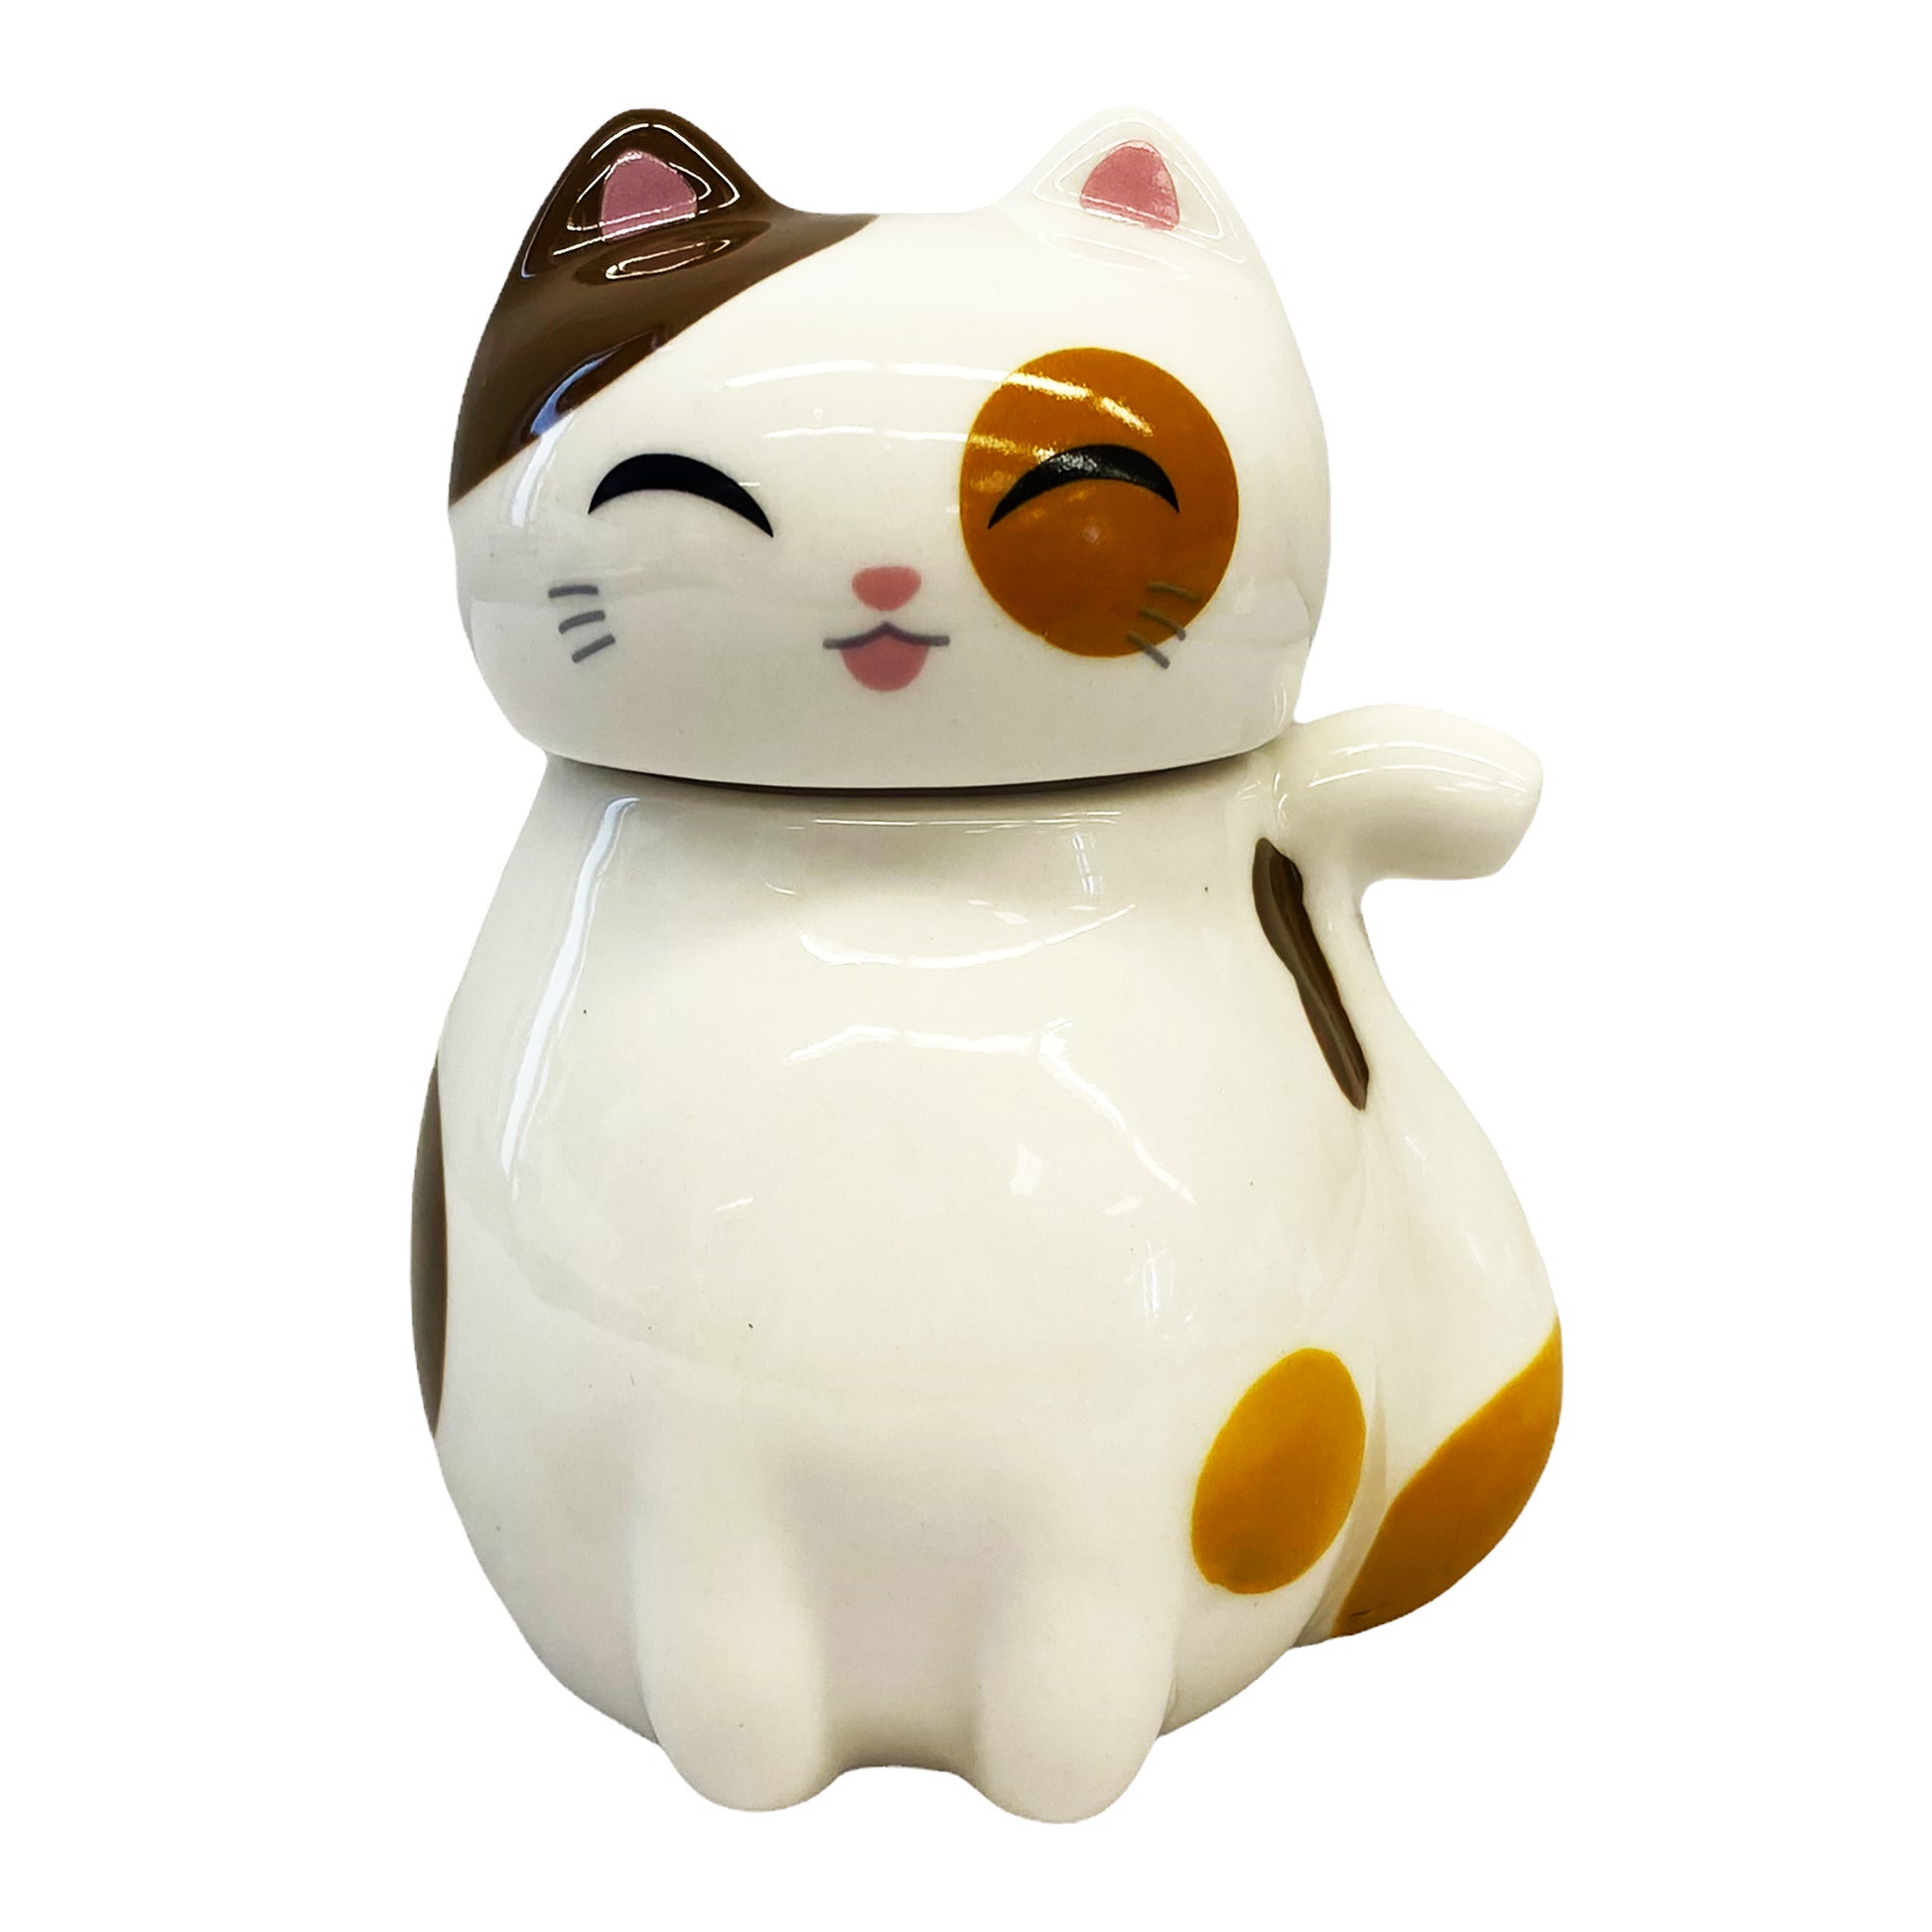 Front graphic view of Genki Cats Porcelain Sauce Dispenser - Beige 3.75 Inches 4oz